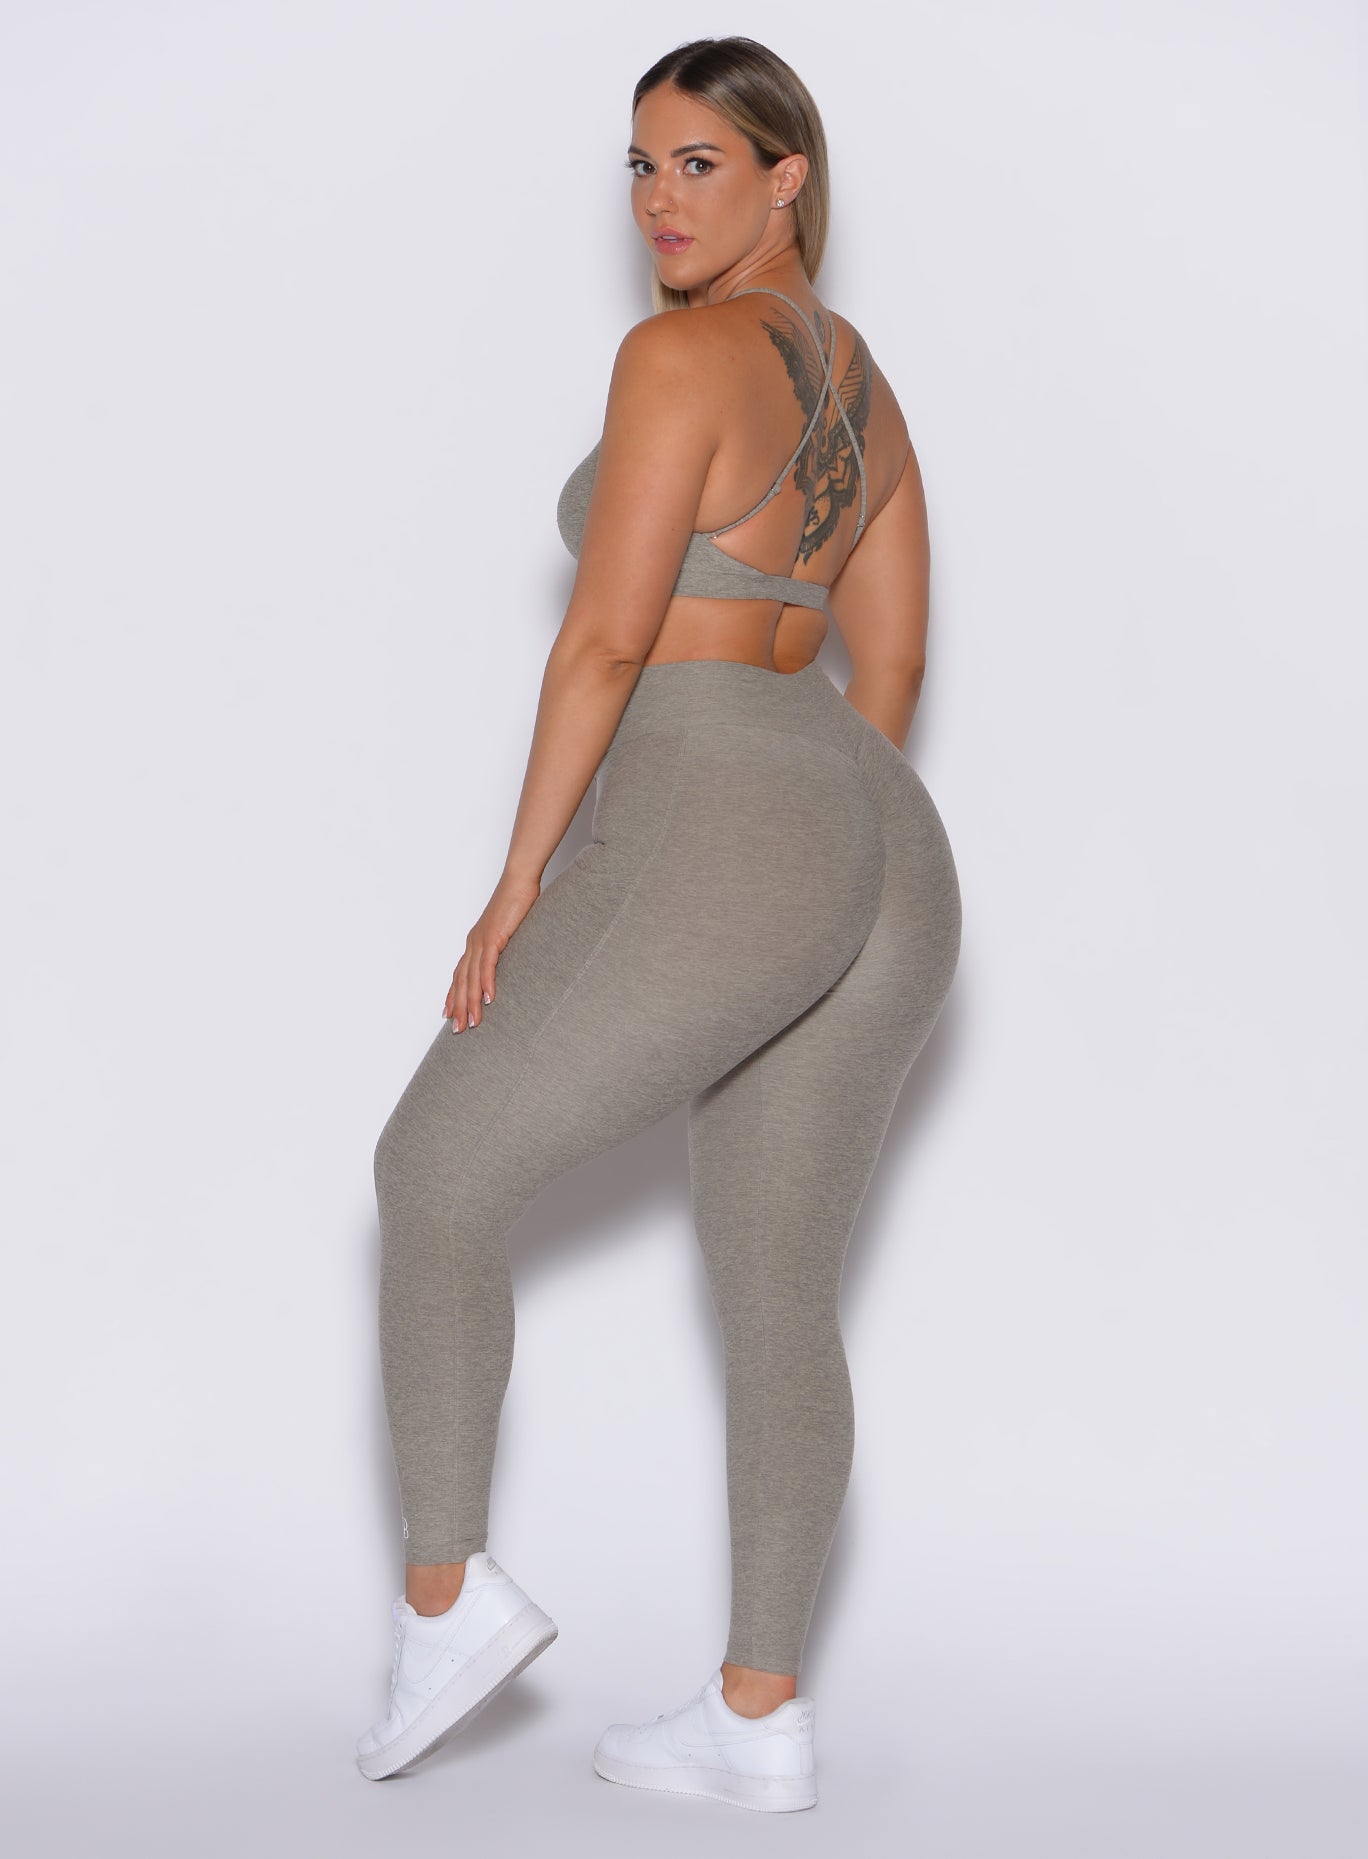 left side profile view of a model wearing our curves leggings in nori color along with the matching bra